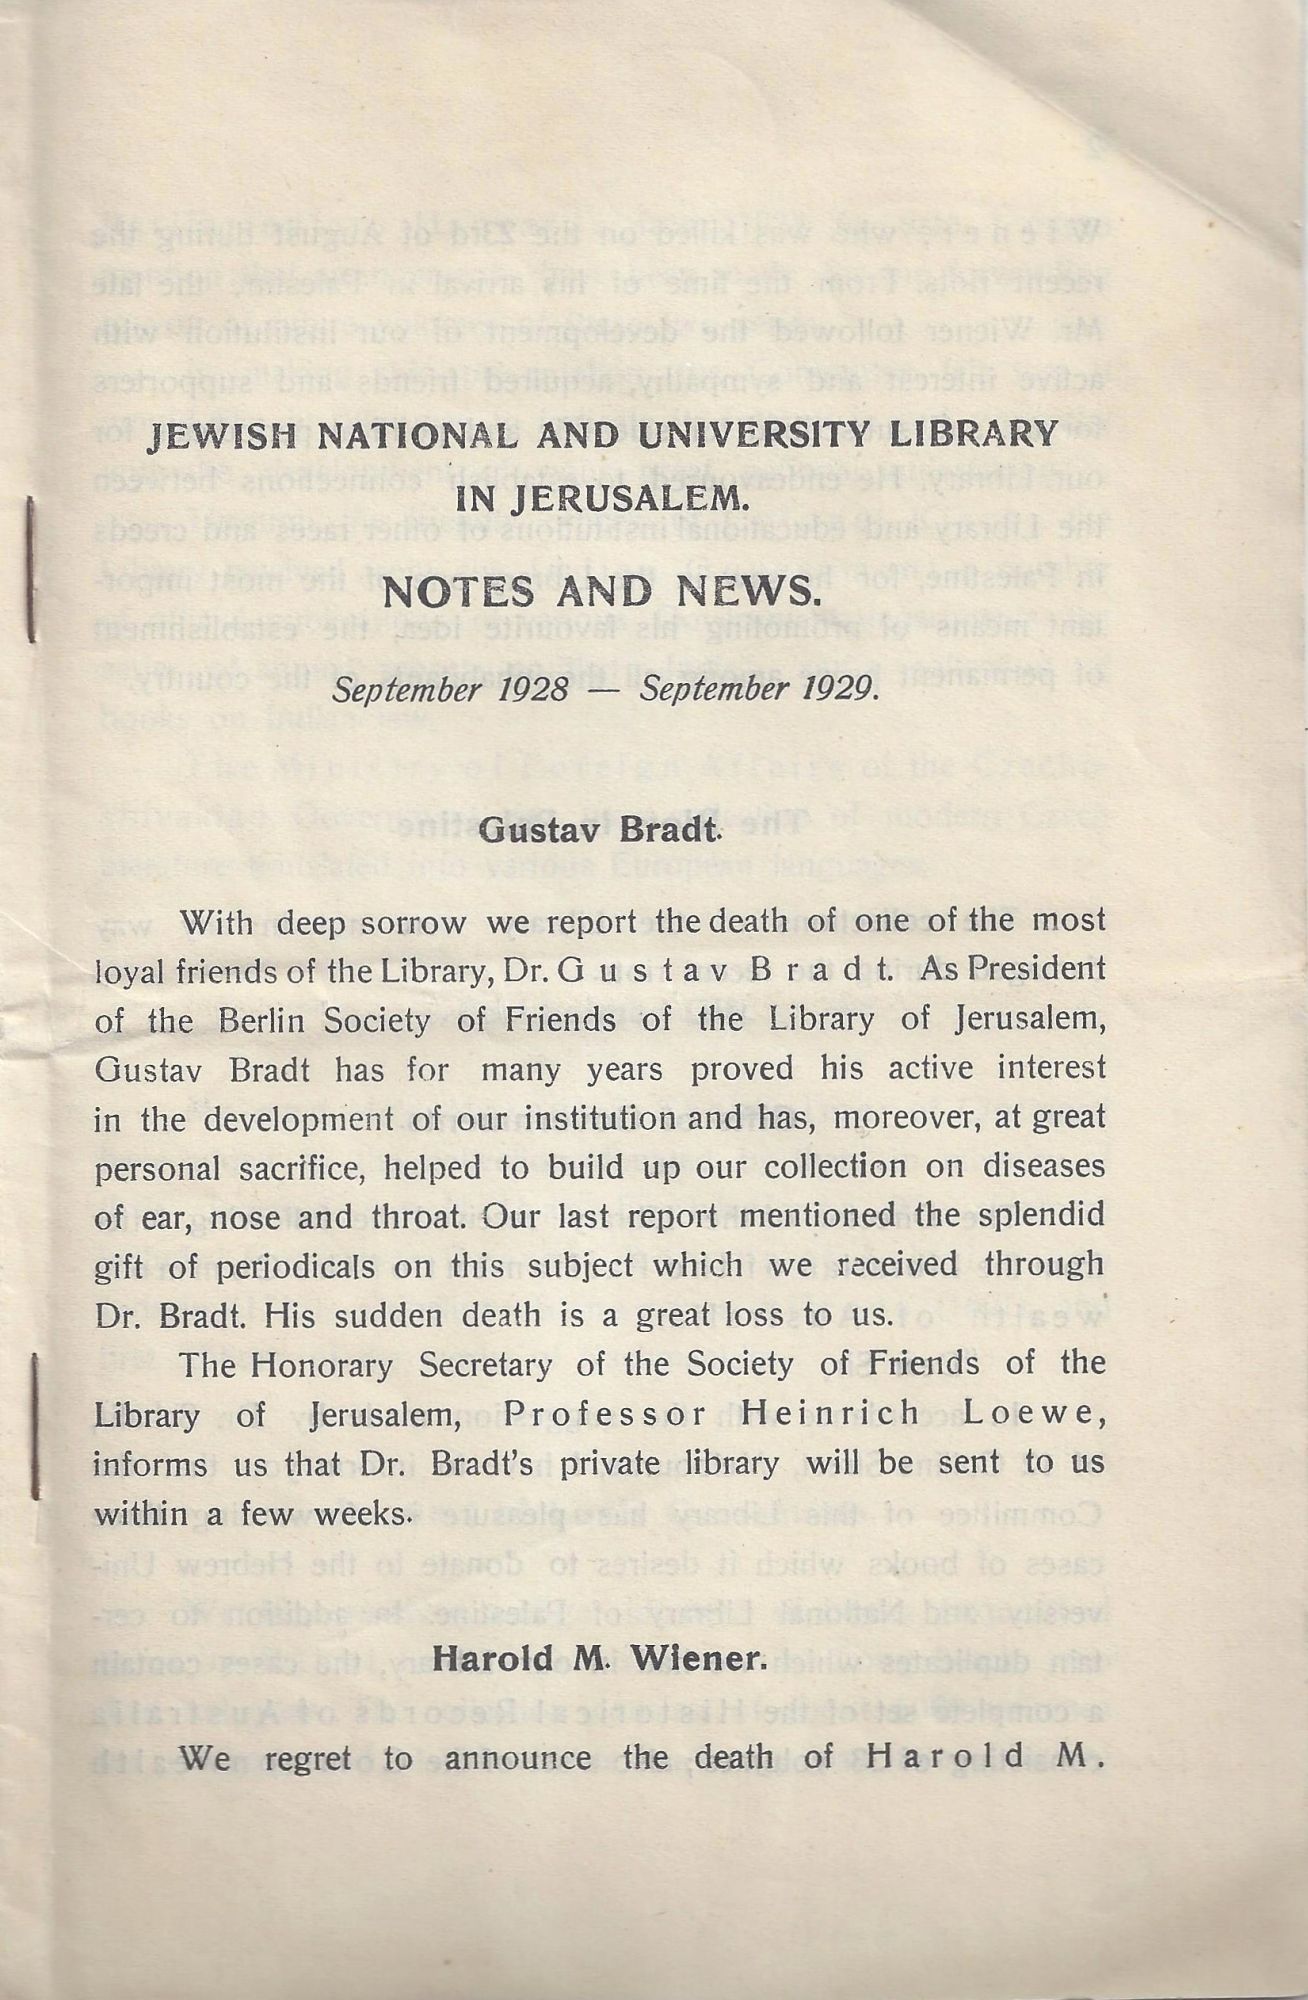 JEWISH NATIONAL AND HEBREW UNIVERSITY LIBRARY IN Jewish National and